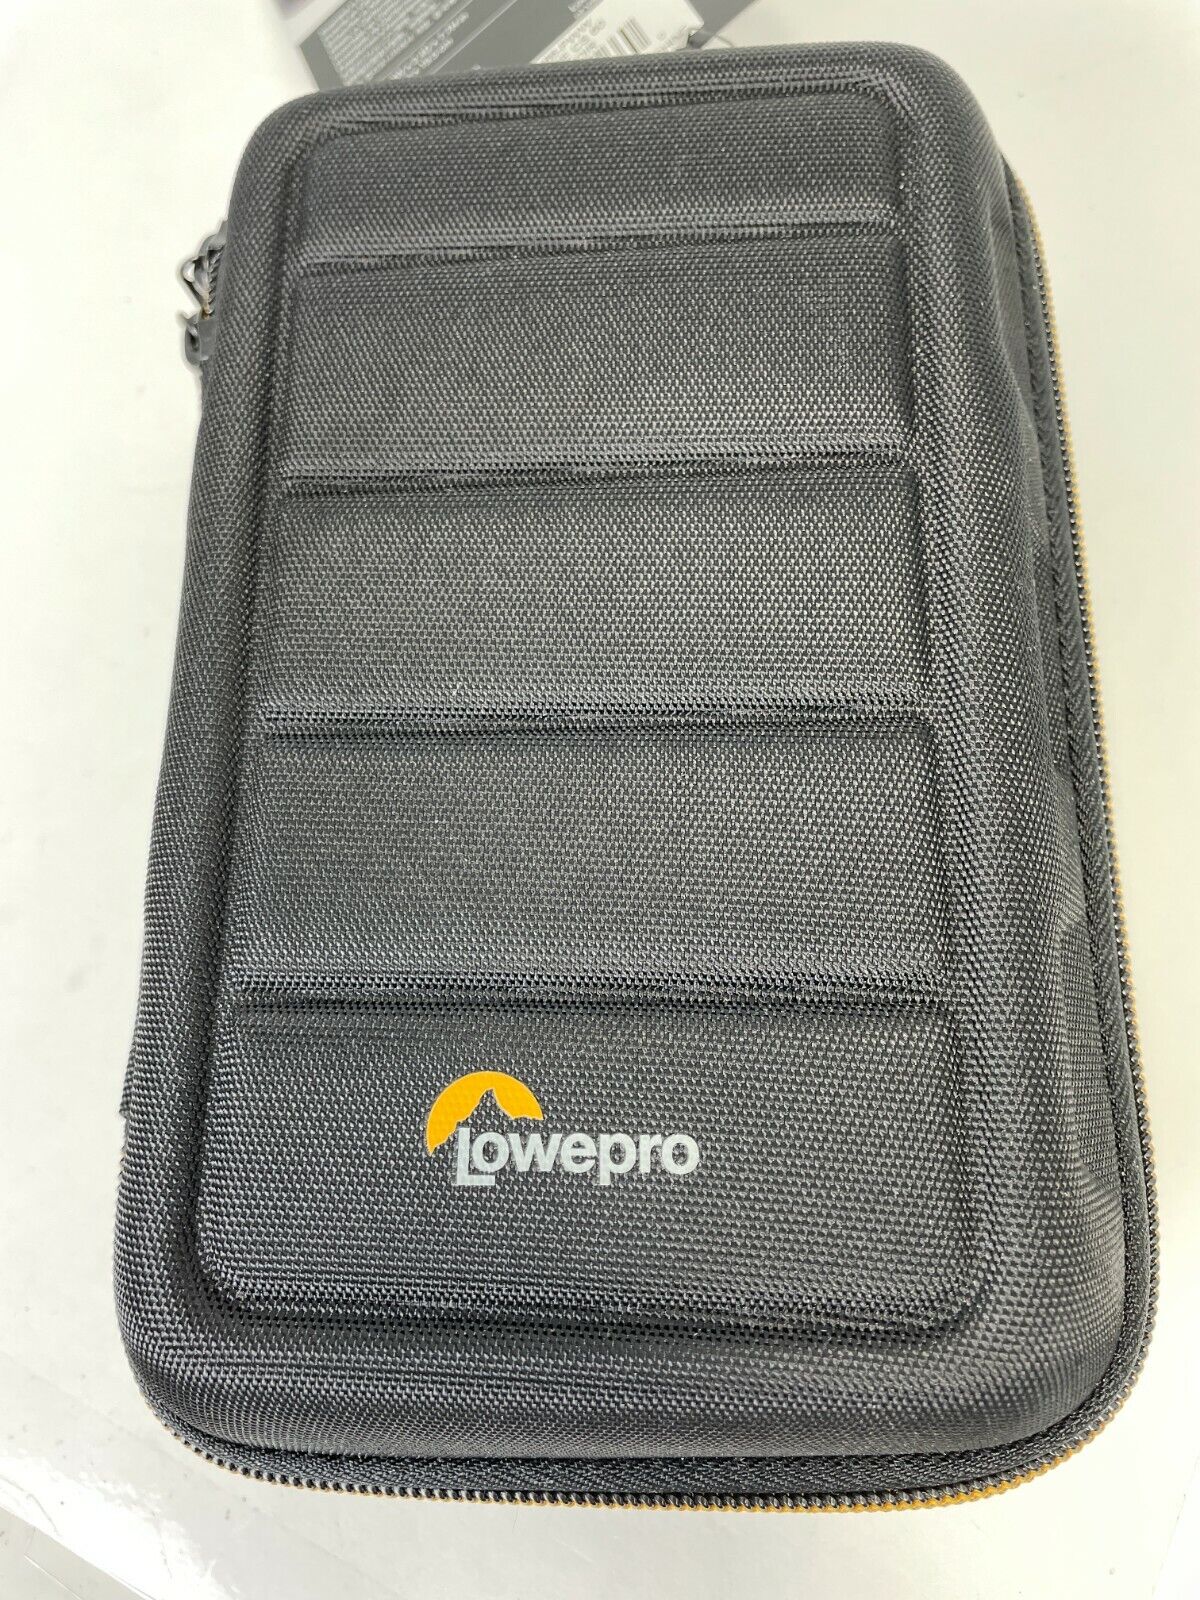 Lowepro Hardside CS 60 Case for Small Drone, 2x Cameras, 1-2 L...